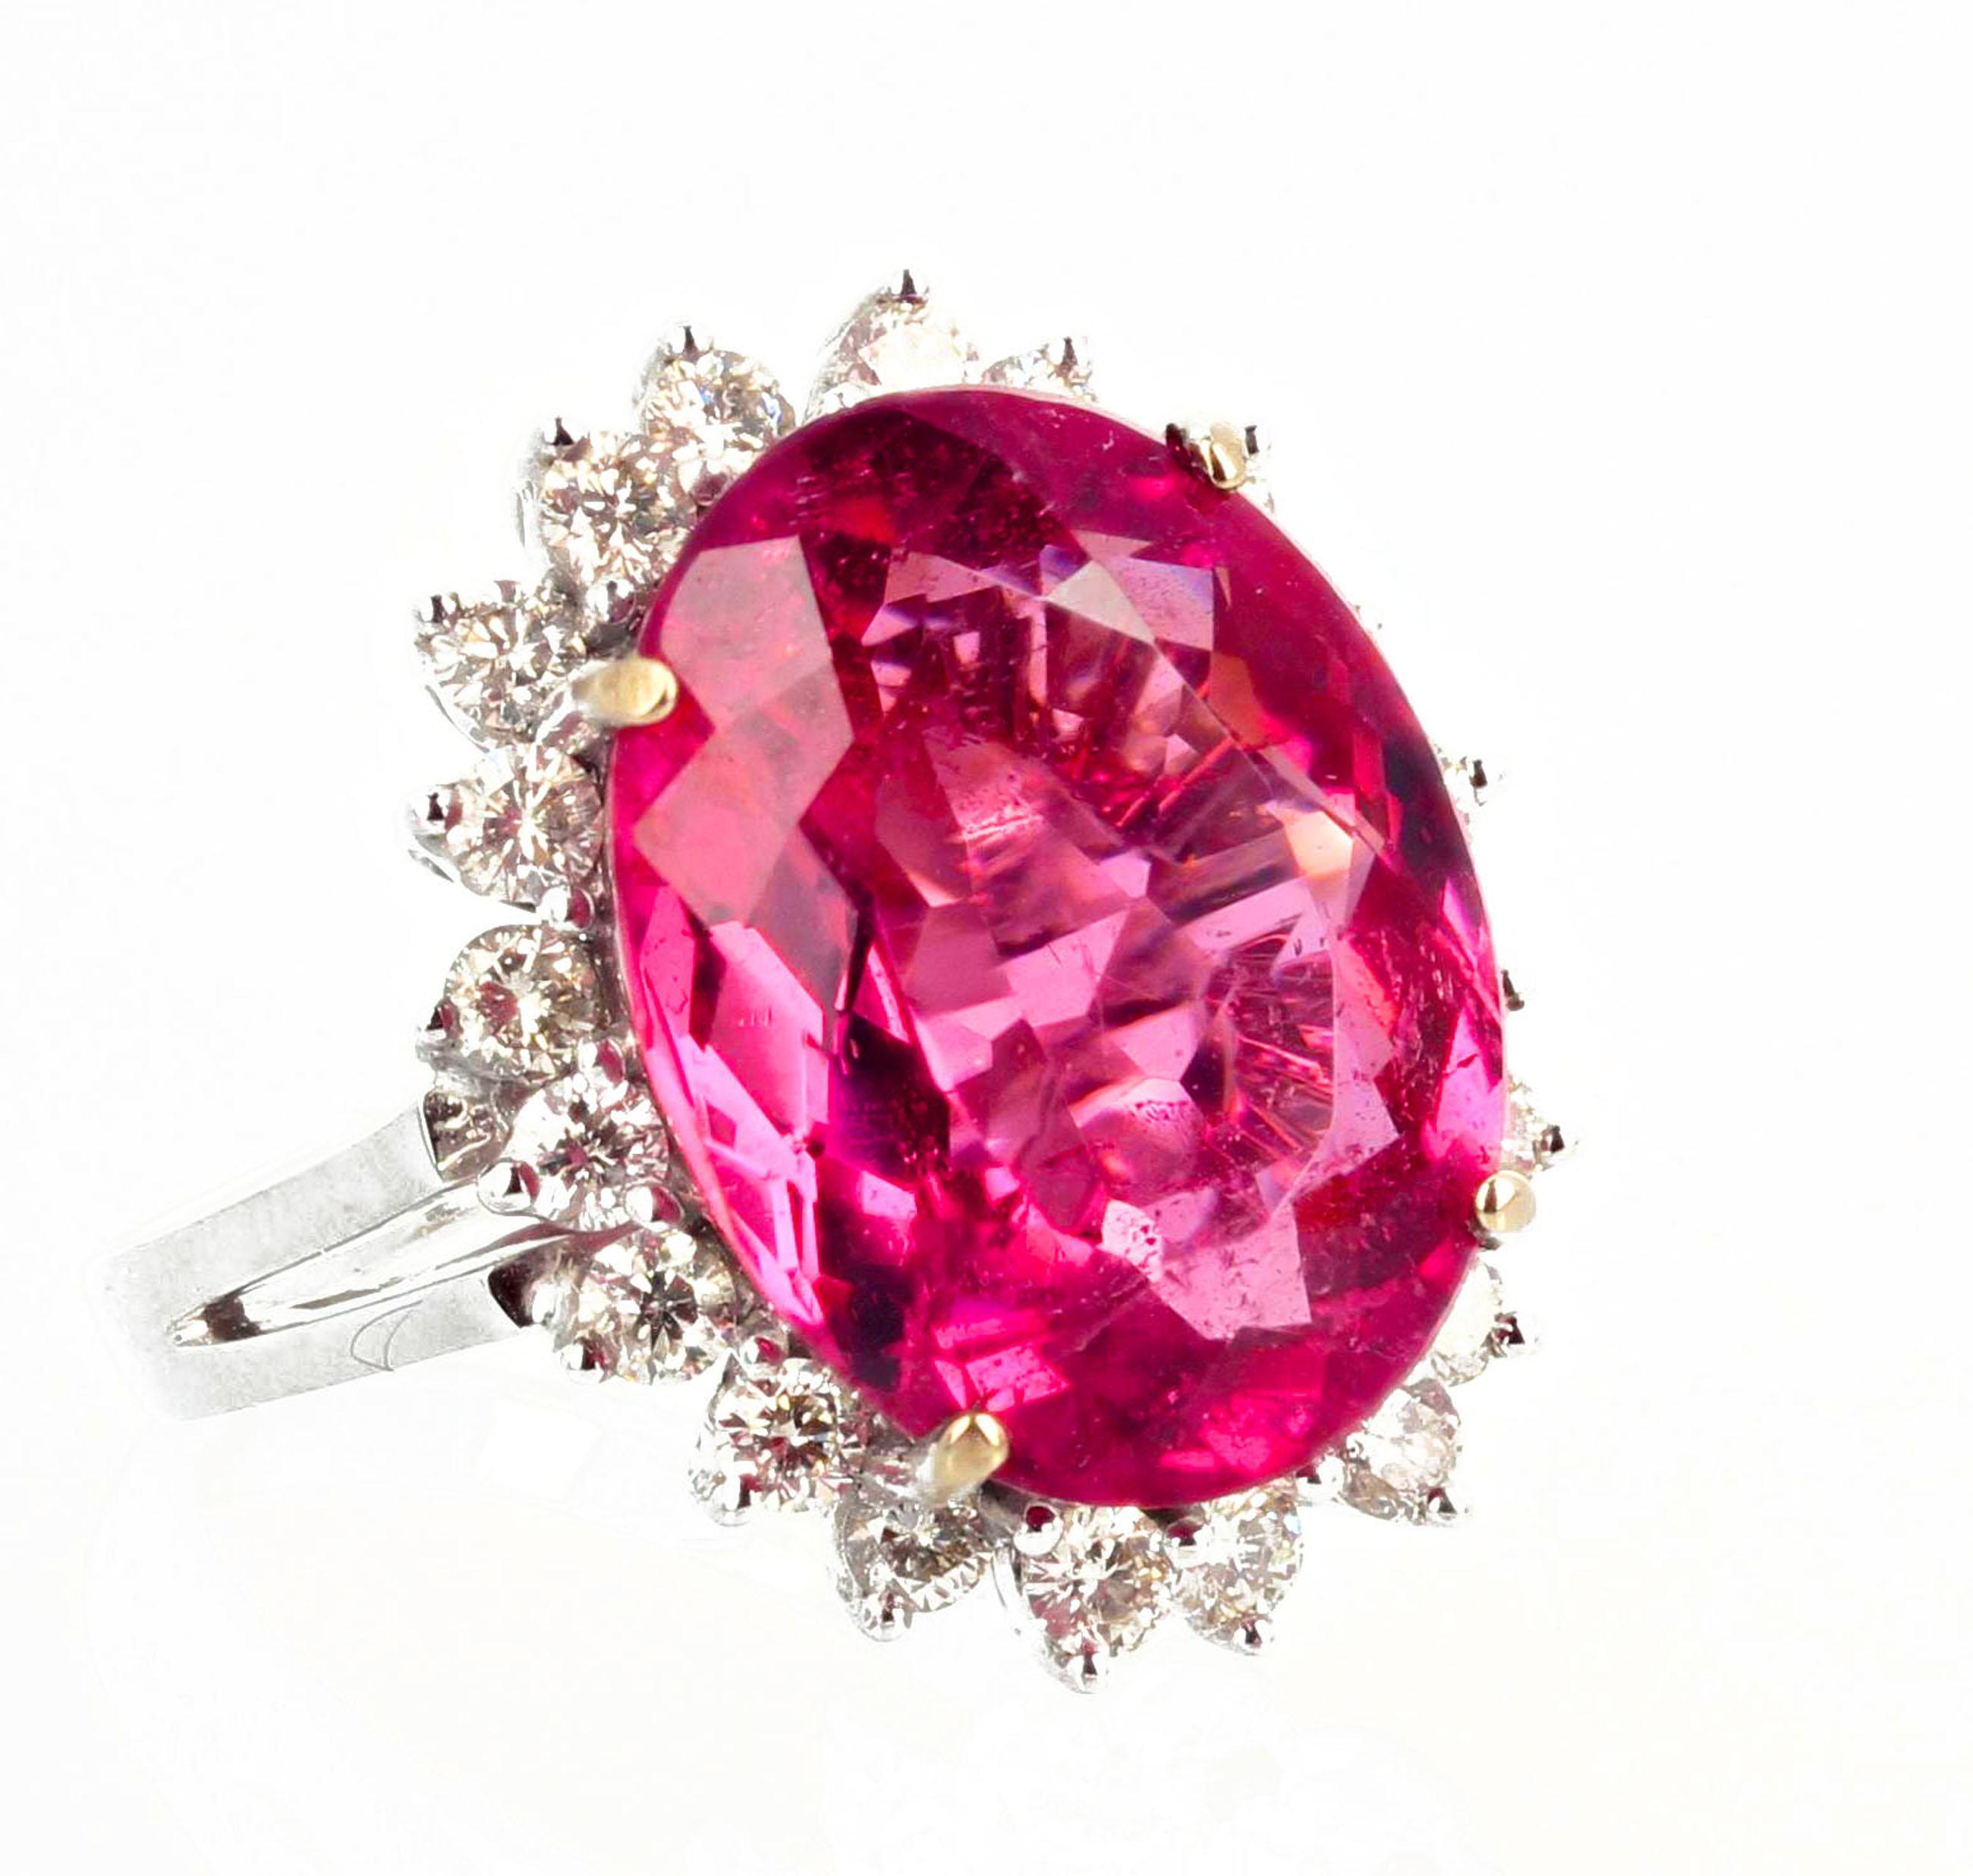 AJD GORGEOUS Brilliant Red 6.5 Ct Rubelite Tourmaline & Diamonds Gold Ring In New Condition For Sale In Raleigh, NC